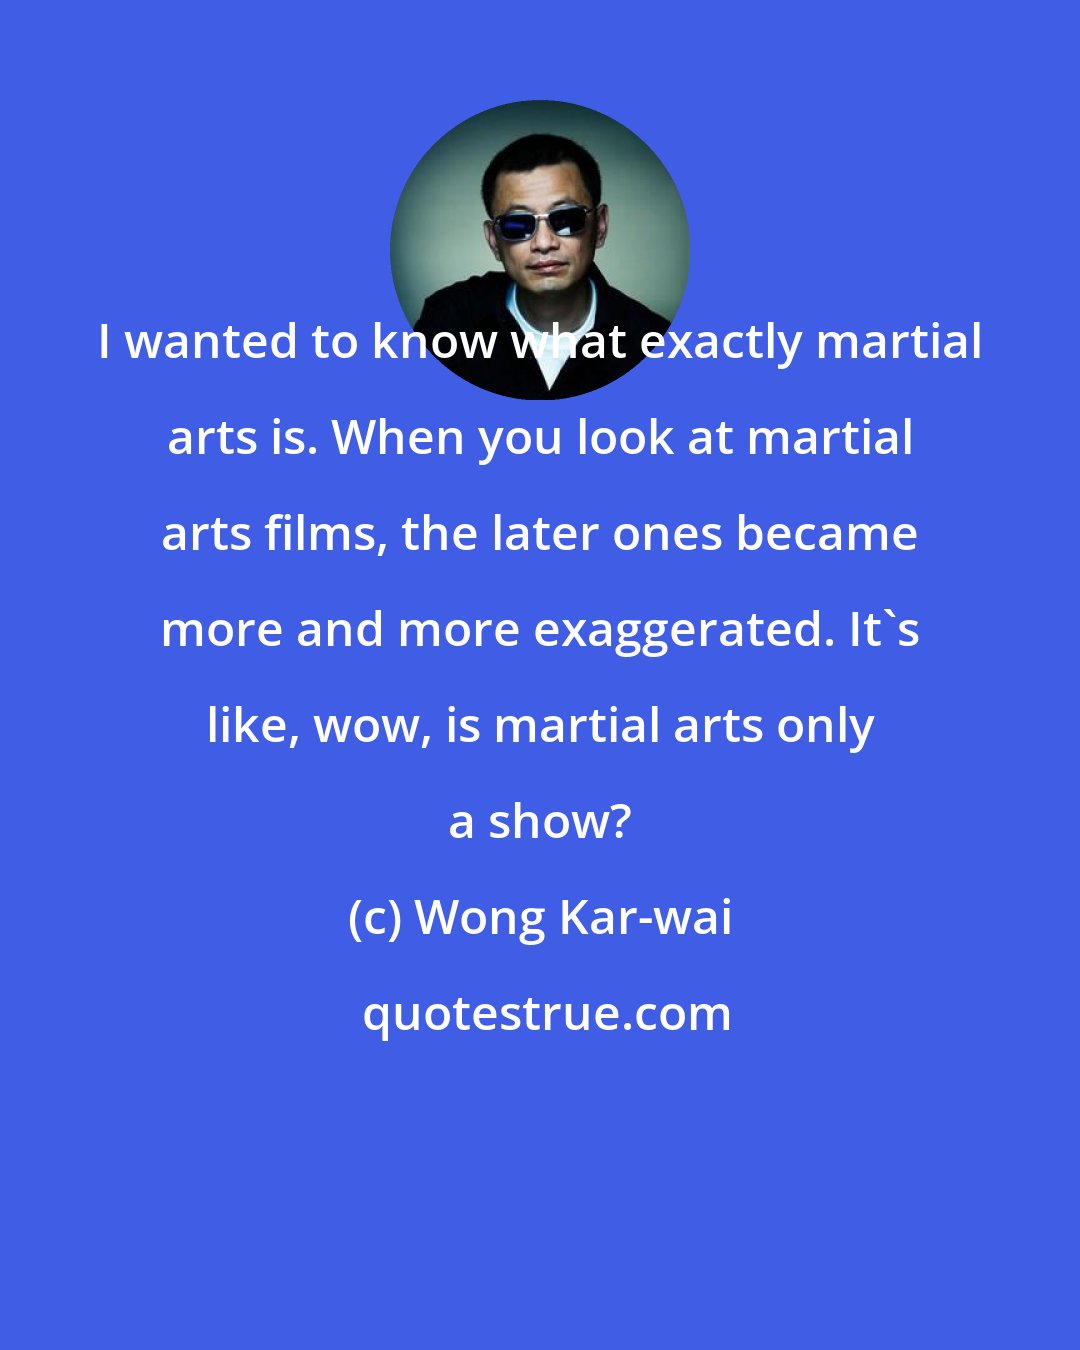 Wong Kar-wai: I wanted to know what exactly martial arts is. When you look at martial arts films, the later ones became more and more exaggerated. It's like, wow, is martial arts only a show?